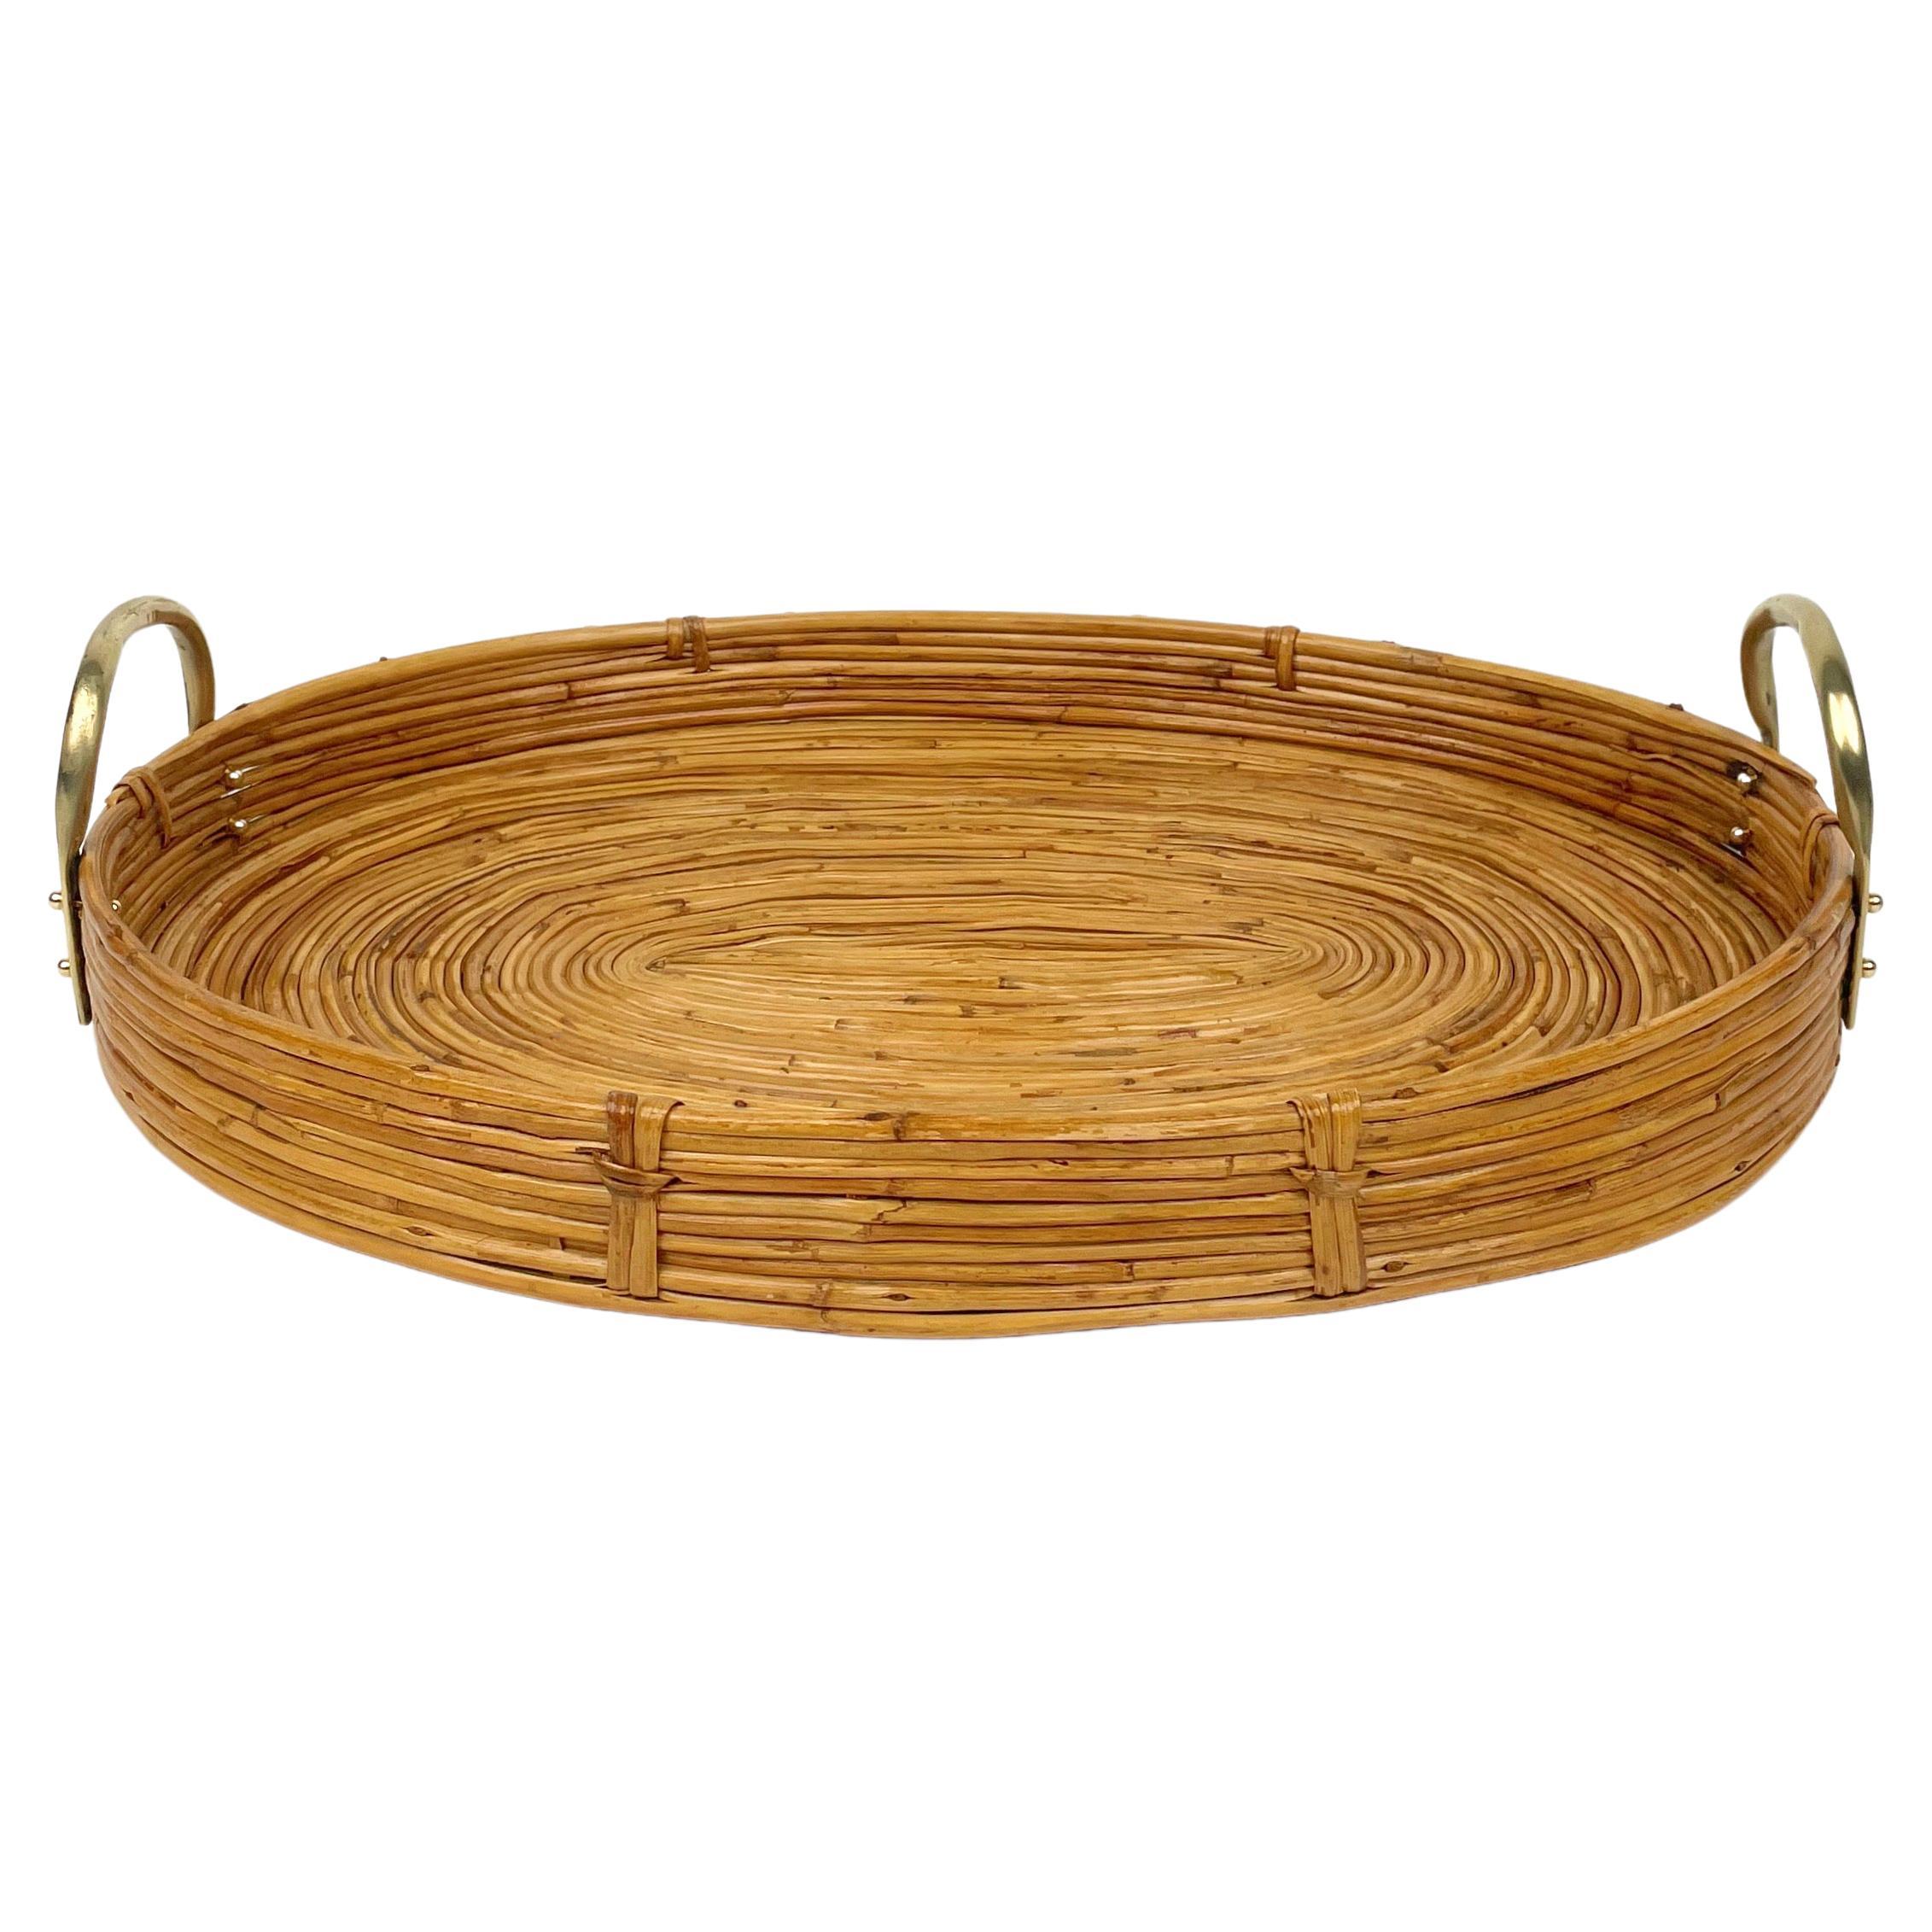 Oval Serving Tray Bamboo, Rattan & Brass, Italy 1970s For Sale